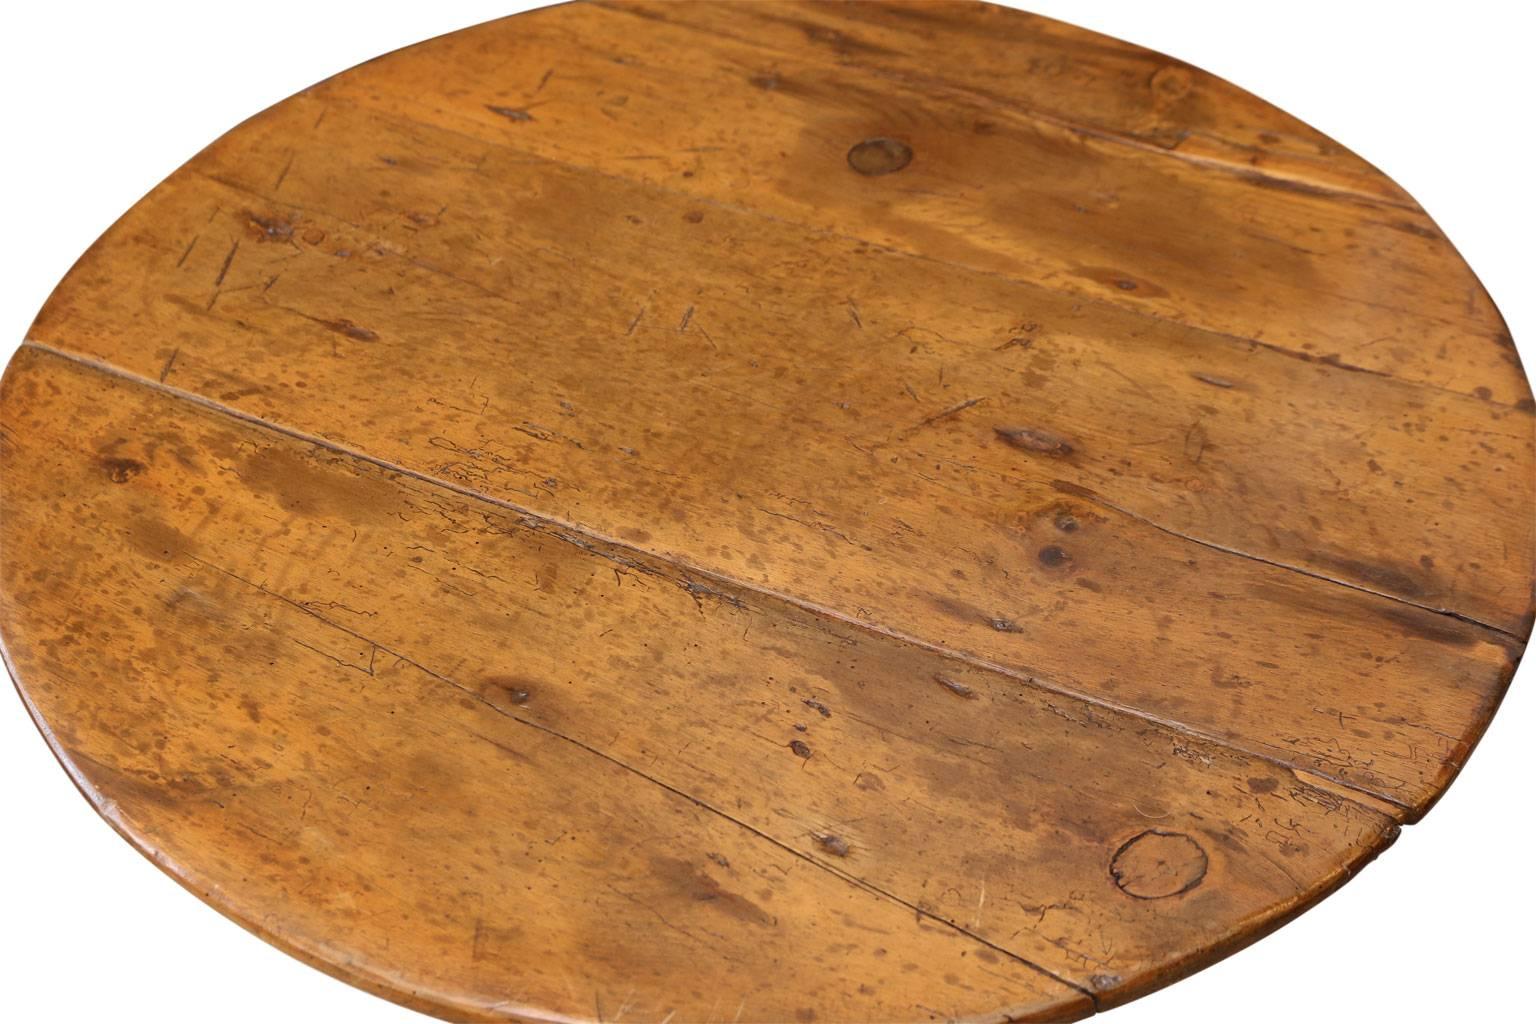 Welsh cricket table: pine top and brown painted base (original or very old paint). Its under-tray shelf supports are scalloped and its legs feature carved rounded edges and are tapered at the feet. This larger than average, charming cricket table is